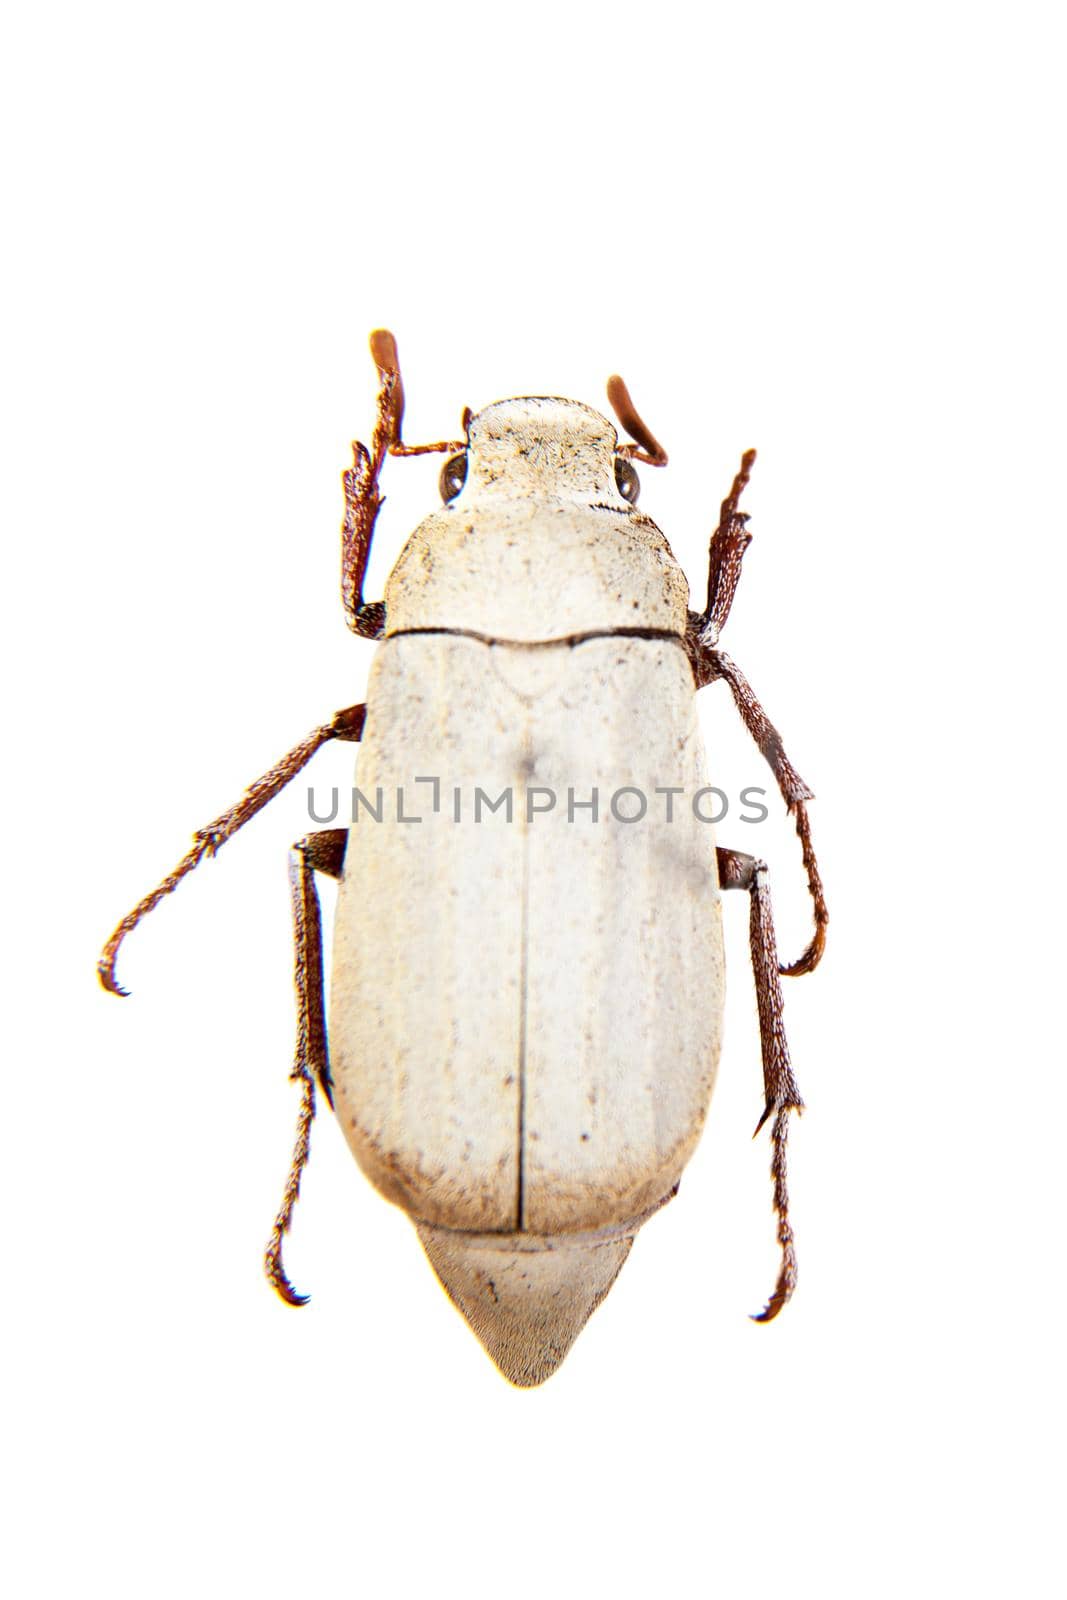 Cockchafe beetle in museum isolated on the white background